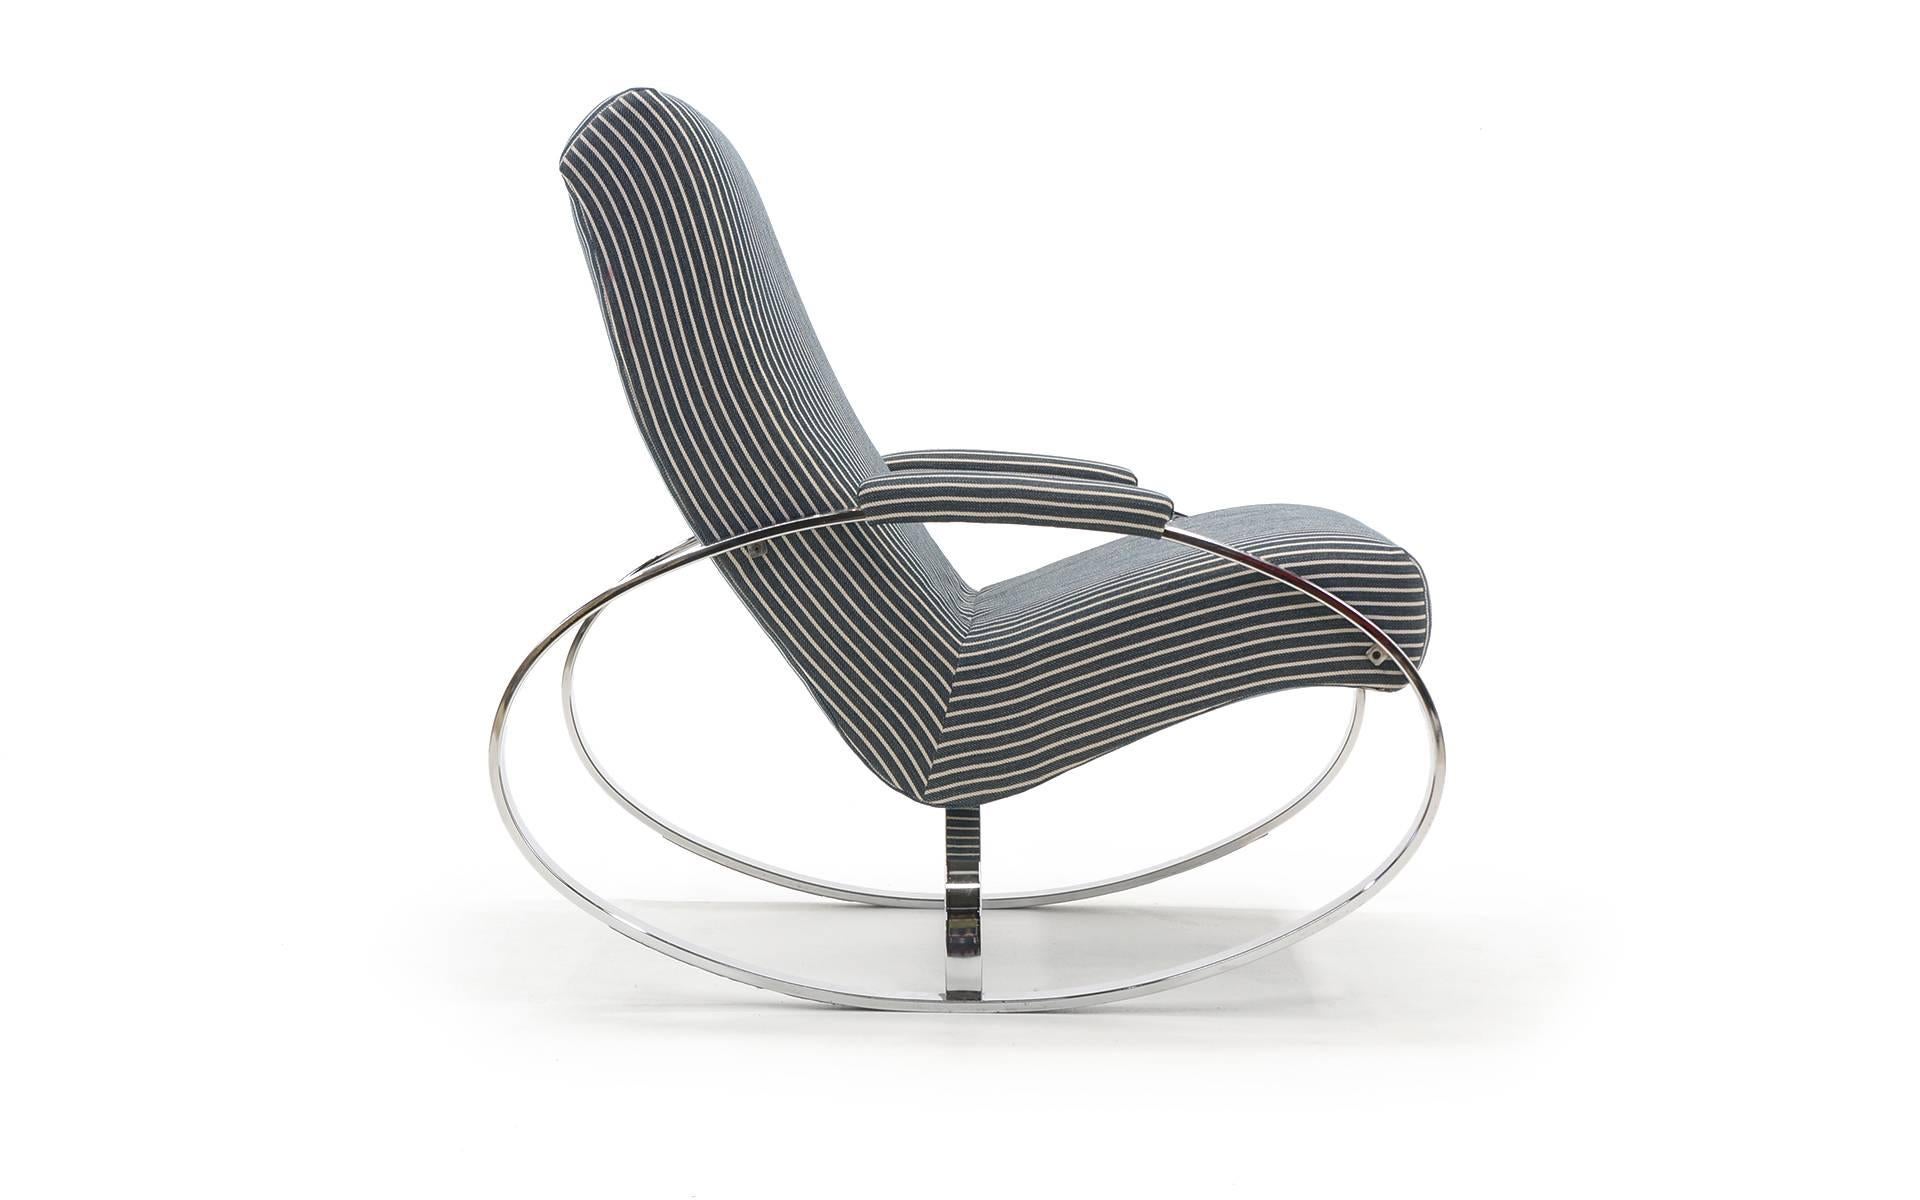 Milo Baughman rocking chair in excellent reupholstered condition. Circular / elliptical shaped chromed steel frame with charcoal and white fabric.